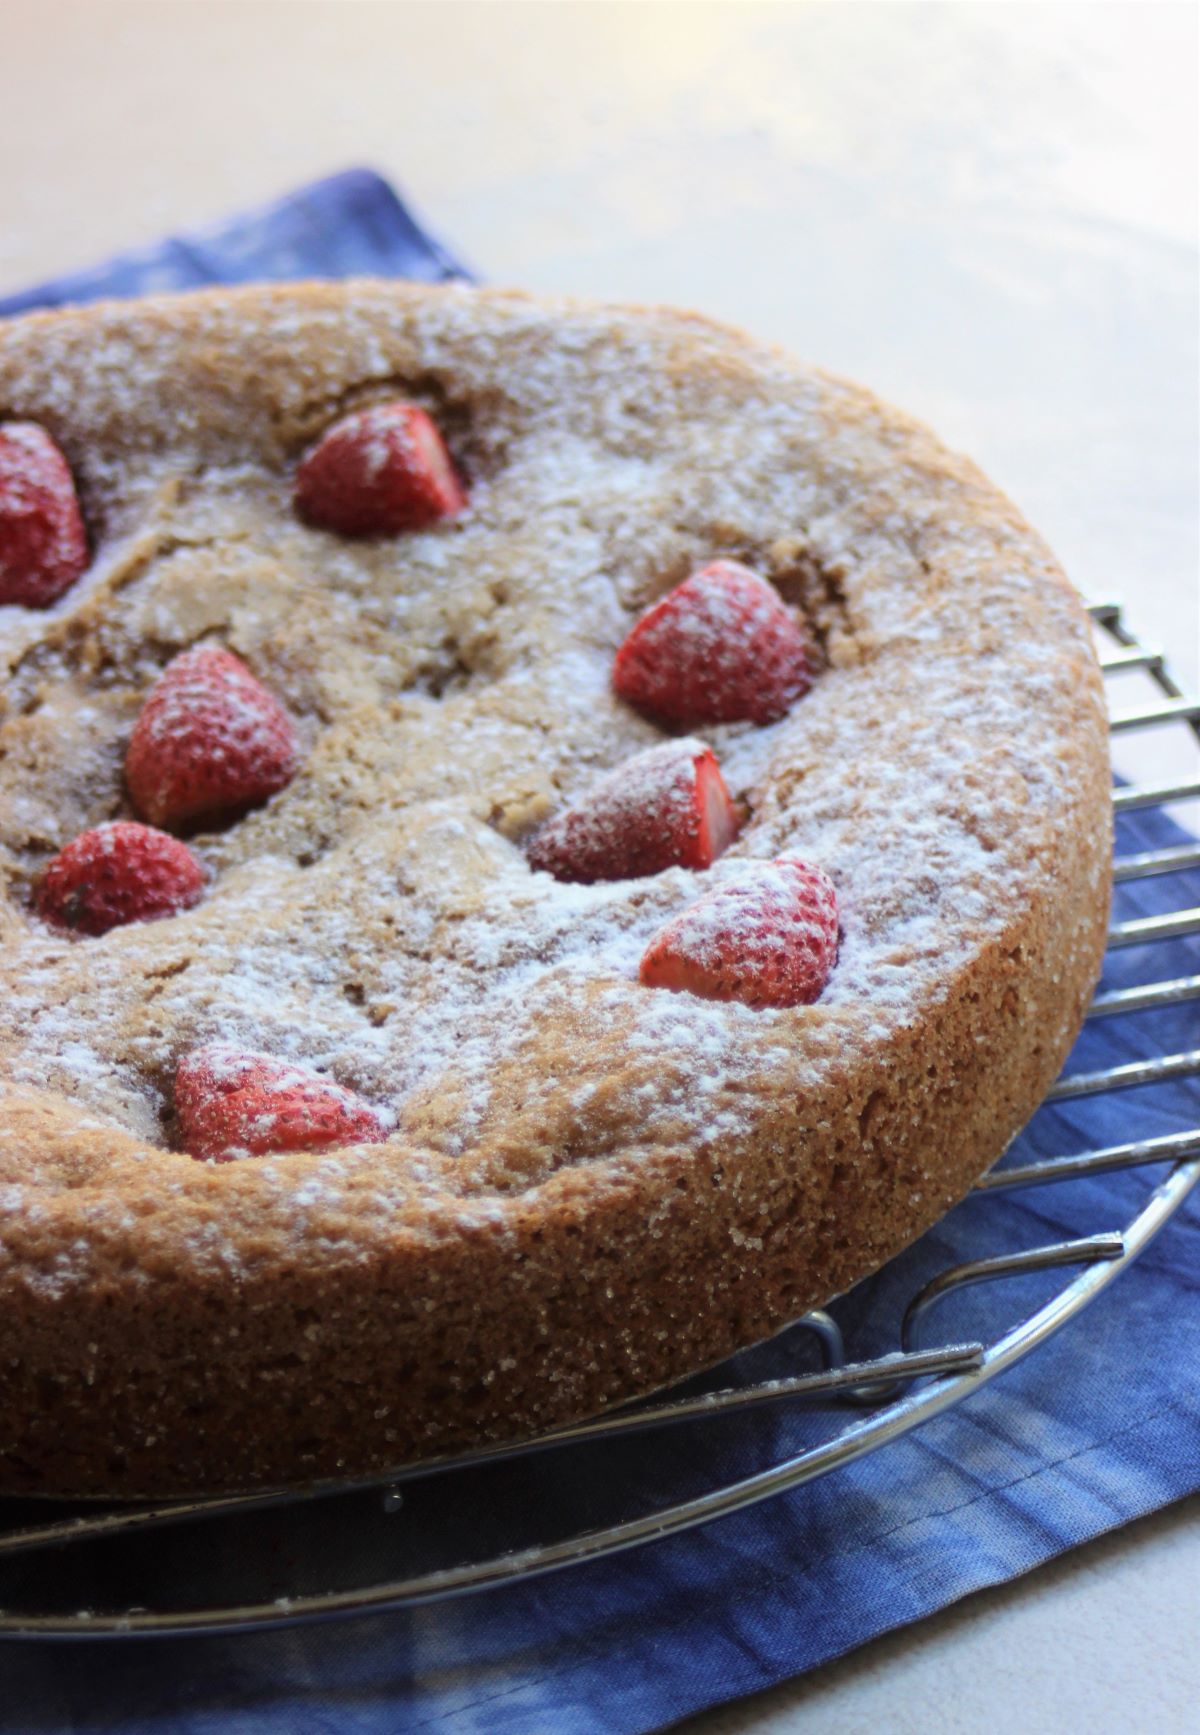 Almond and strawberry cake on a round rack.